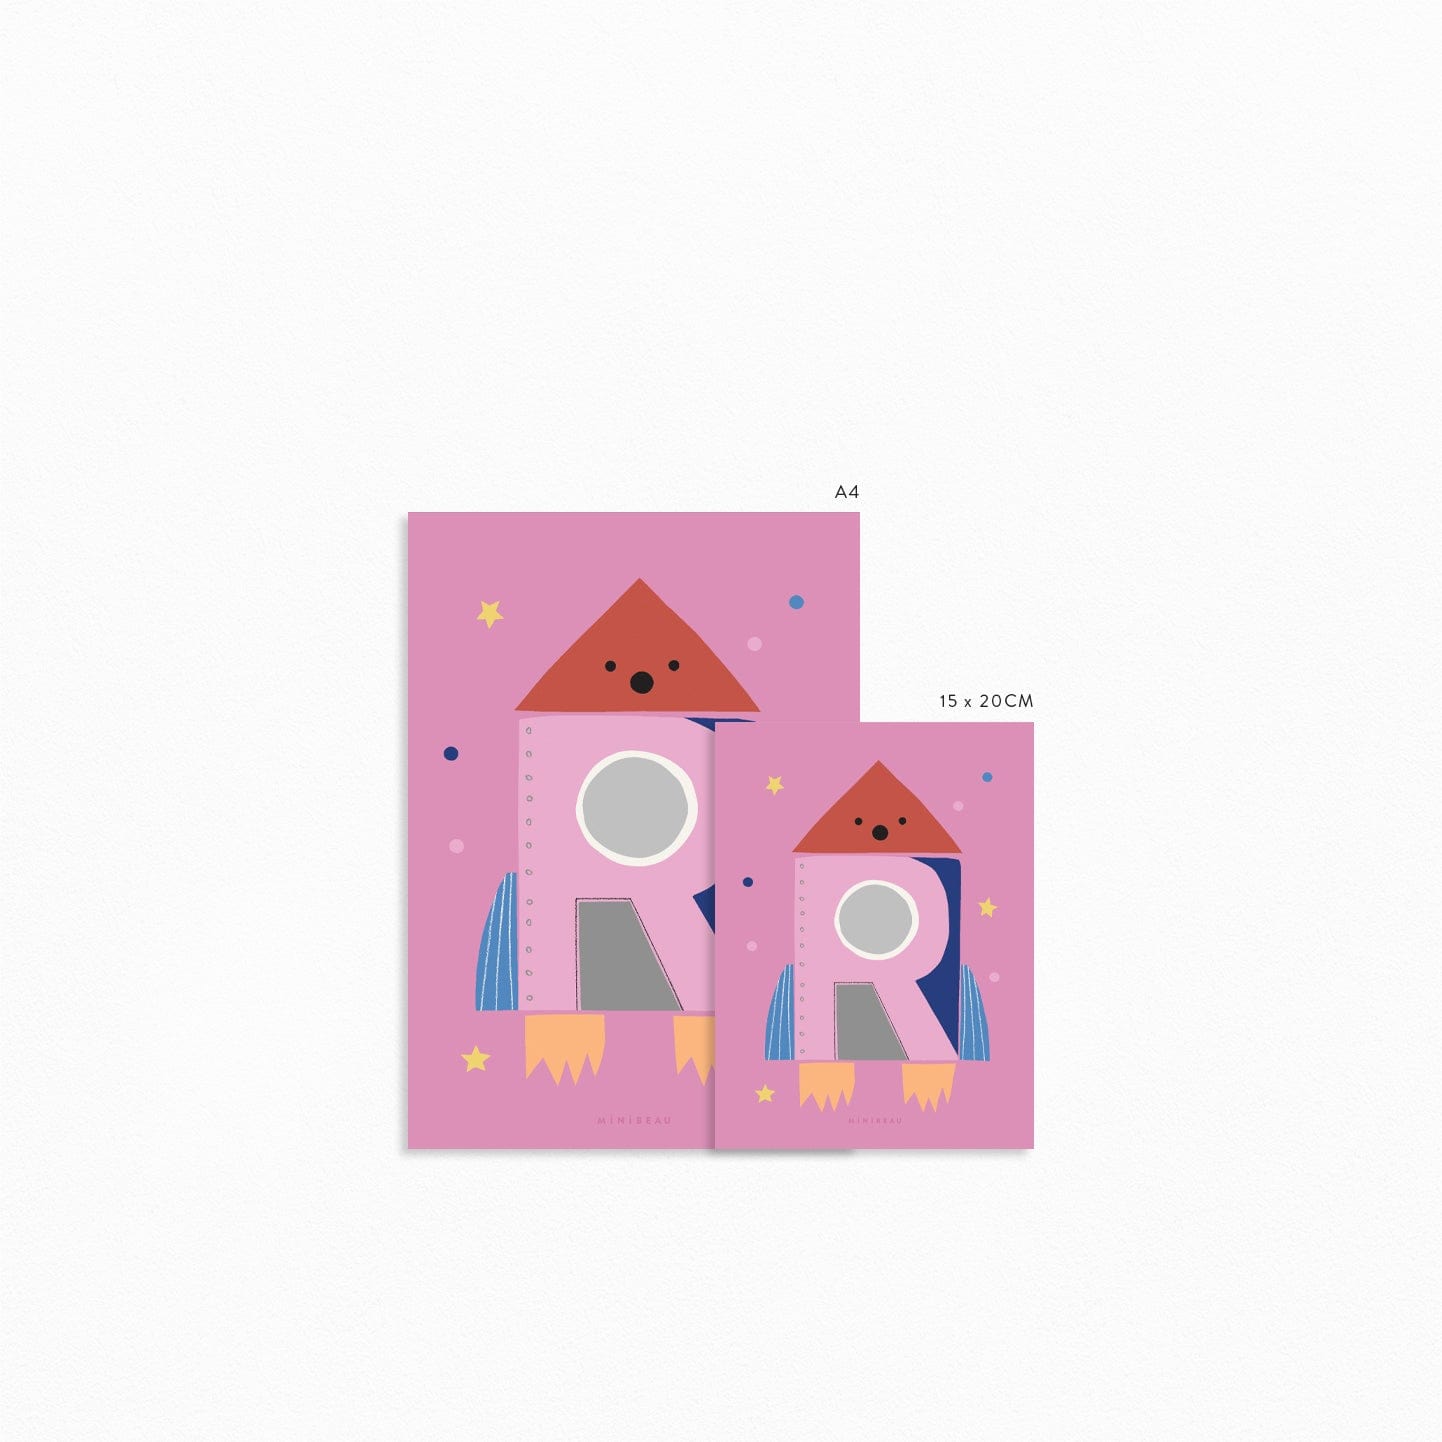 Art print showing both sizes, 15x20 and a4 next to each other. Our Happy Alphabet 'R' Art Print shows a shocked rocket lasting of to space with a large pink R on it creating a porthole. On a pink background with coloured dots and yellow stars.